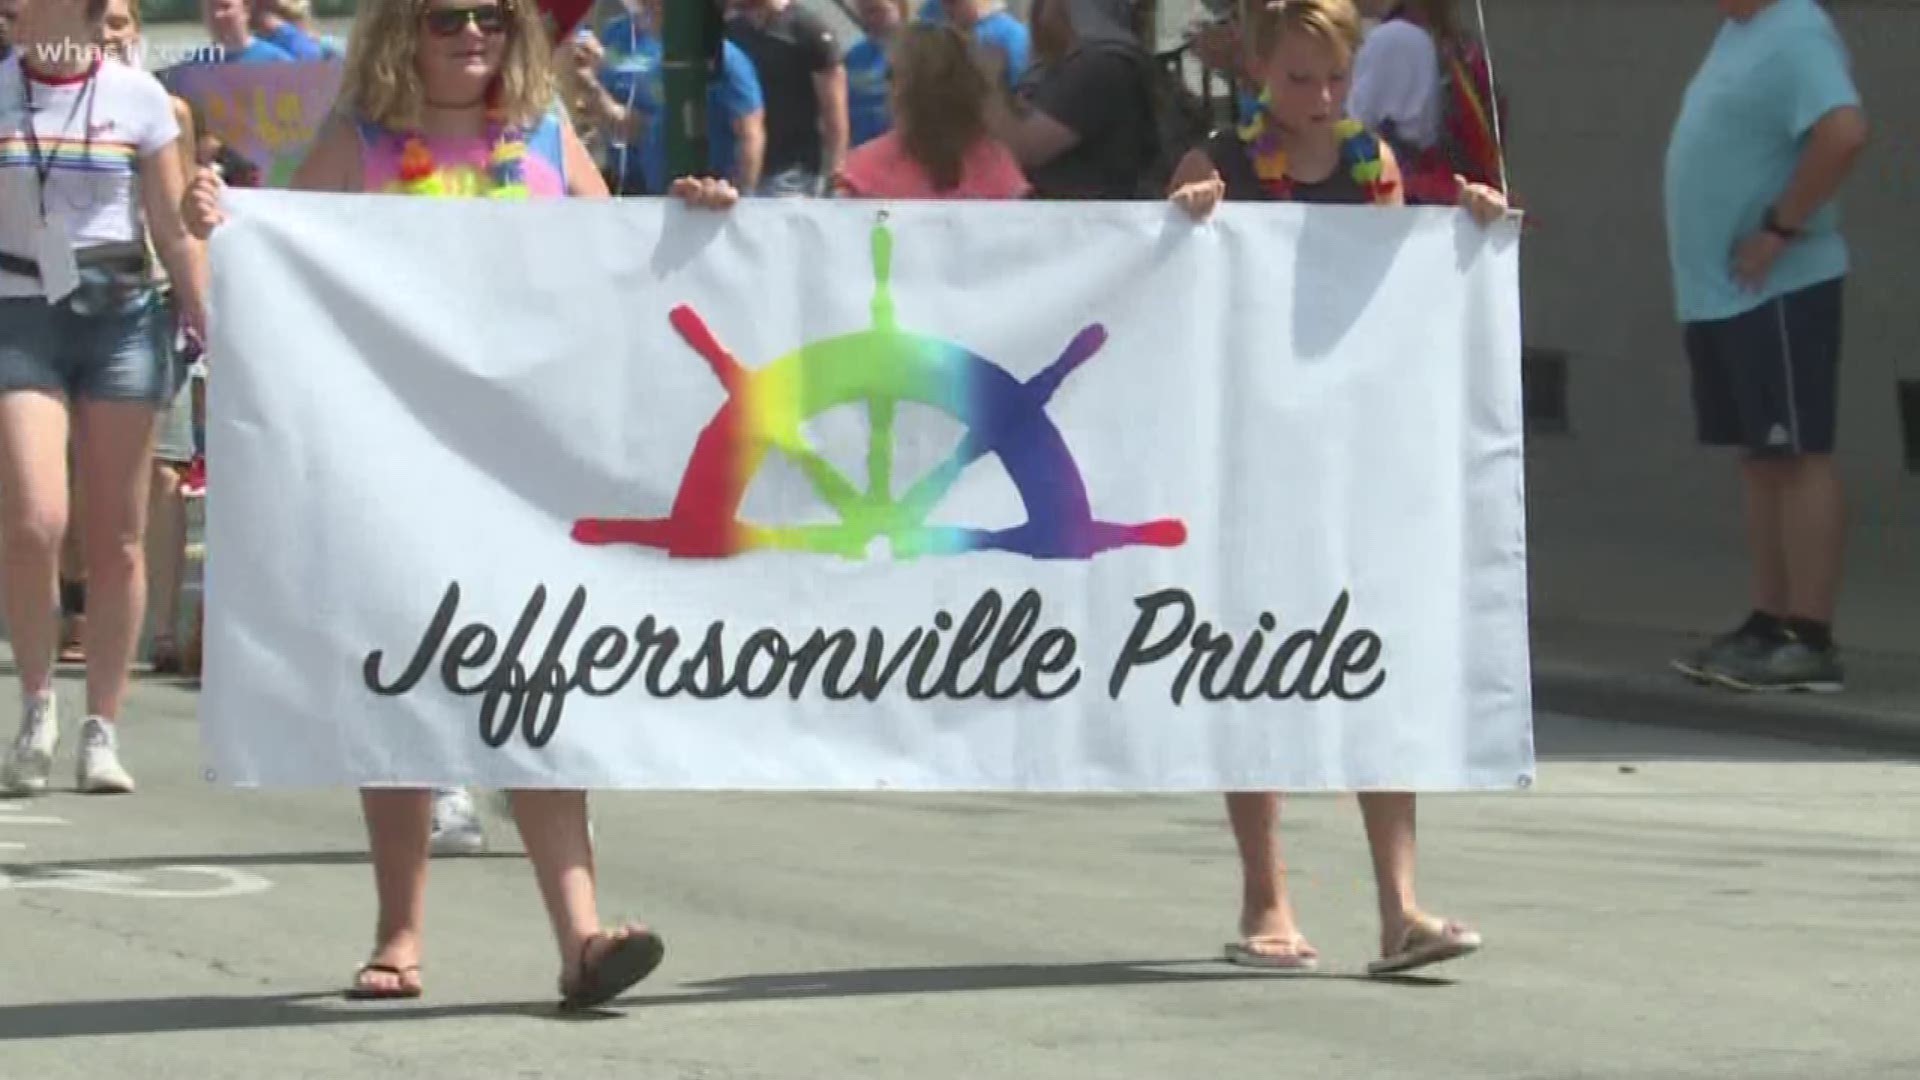 Pride filled the streets of Jeffersonville tonight as the city celebrated their pride parade and festival.